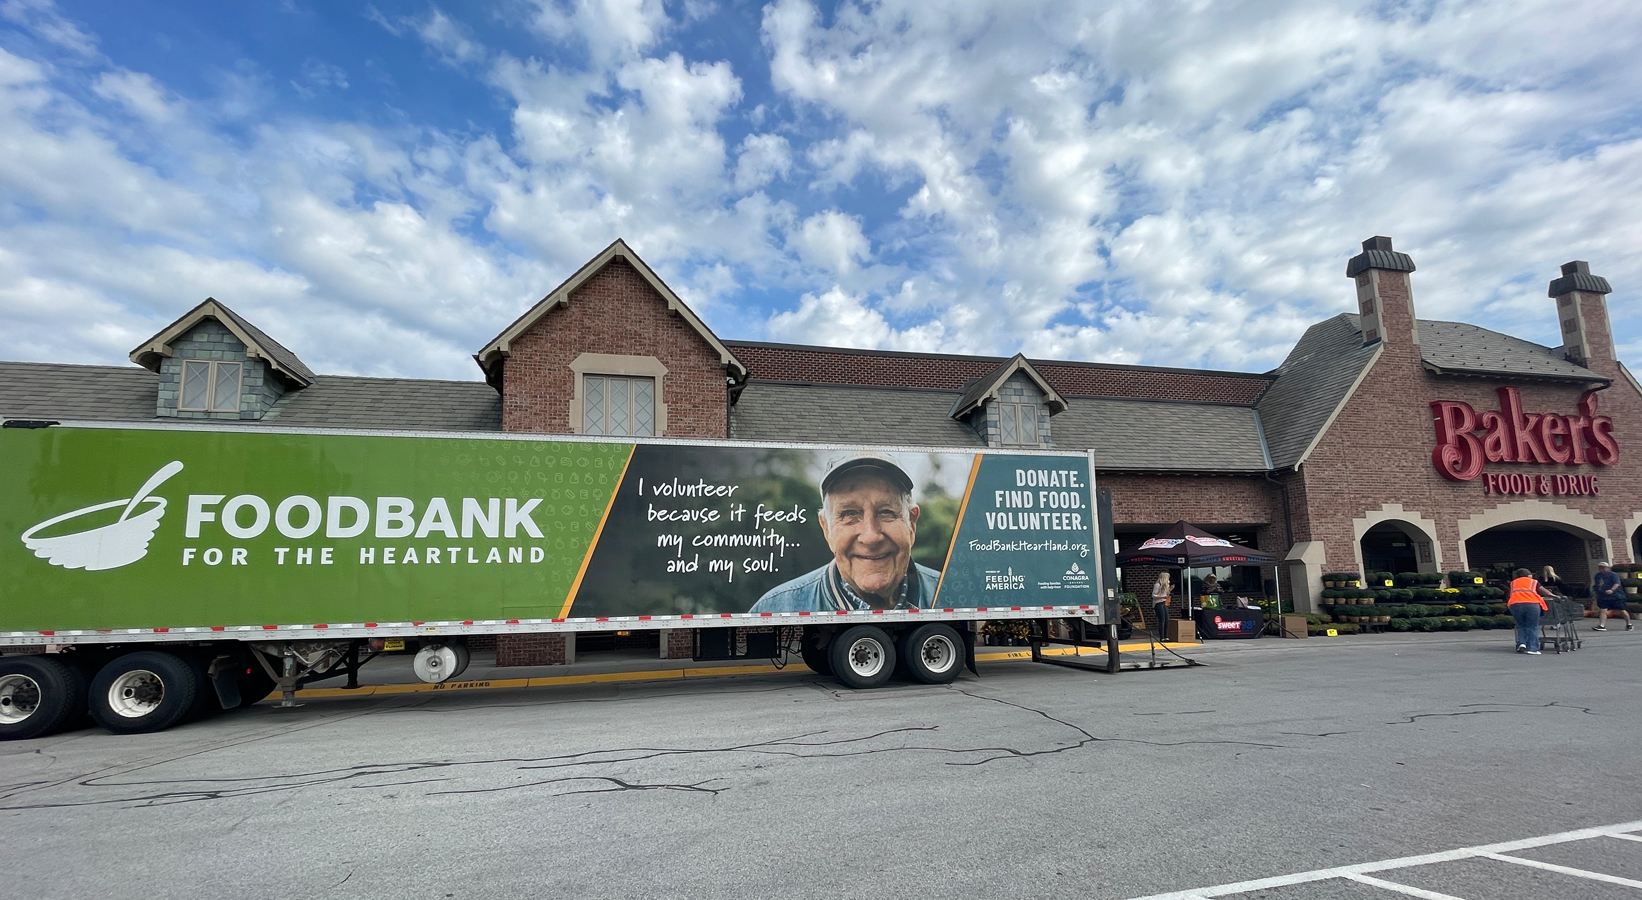 Photo of Food Bank for the Heartland truck in front of Baker's